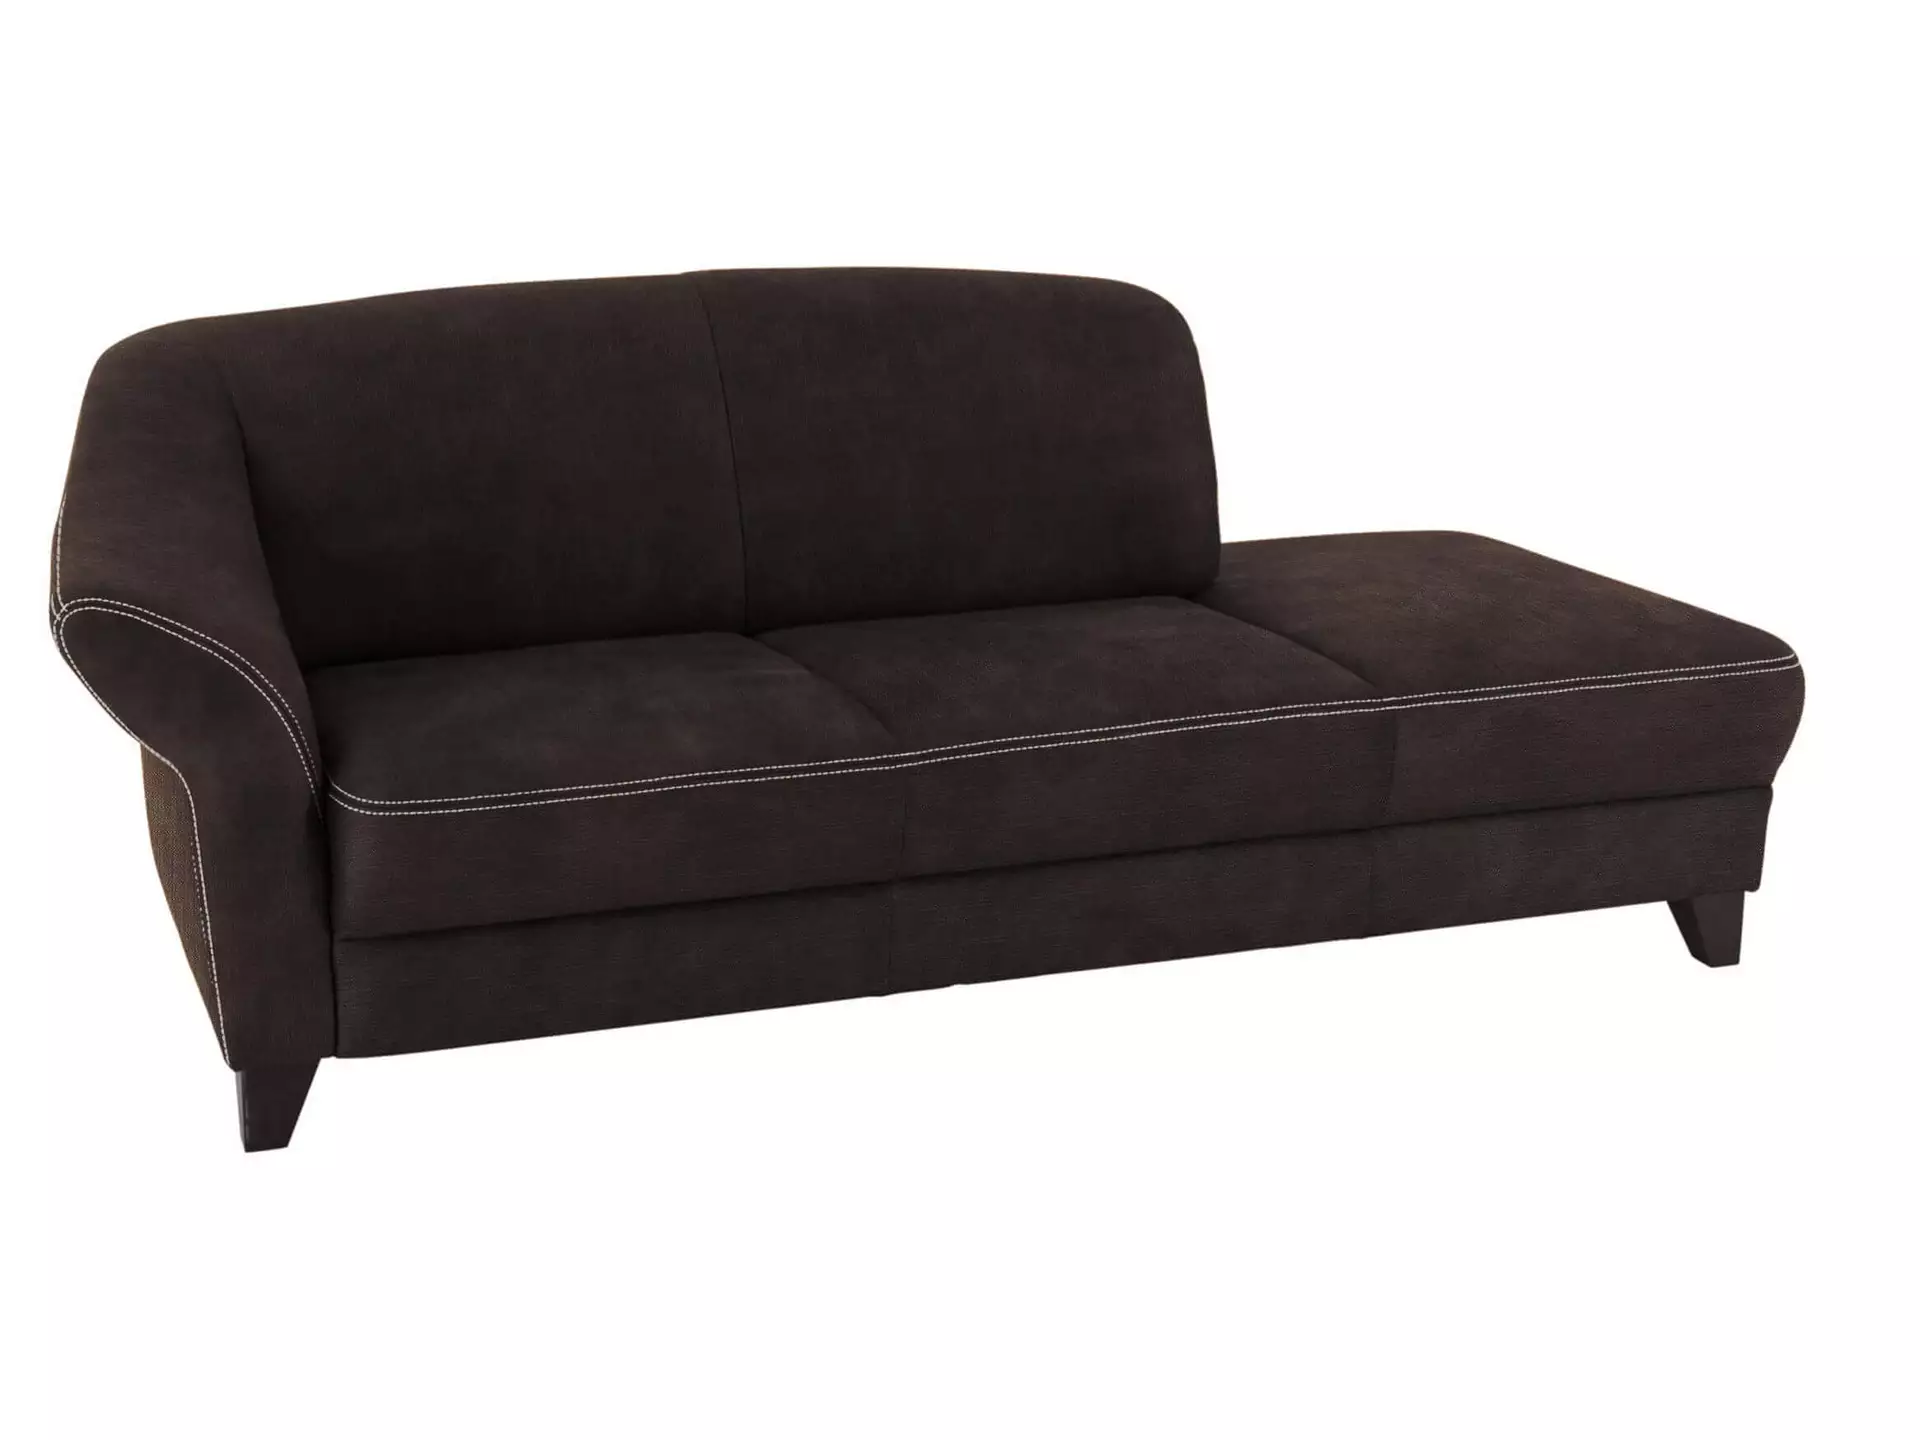 Liegesofa Klosters Basic Ponsel / Farbe: Anthrazit / Material: Stoff Basic